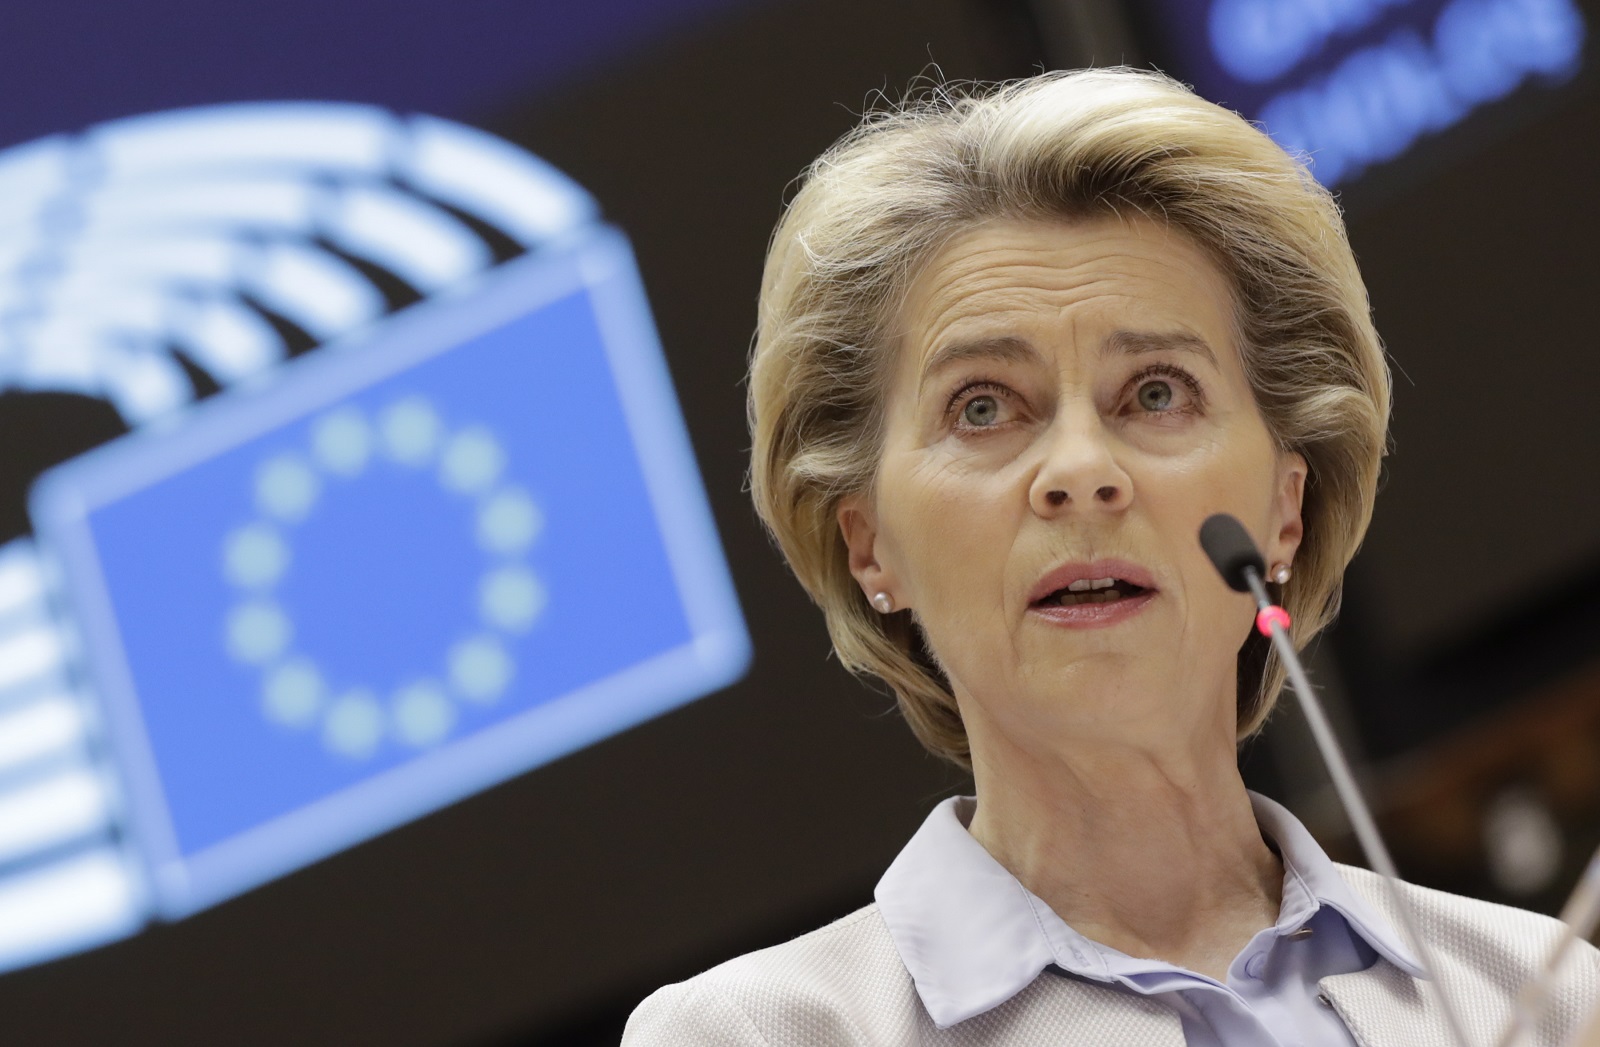 epa08840359 European Commission President Ursula Von Der Leyen speaks during a debate on the next EU council and last Brexit devlopement during a plenary session at the European Parliament in Brussels, Belgium, 25 November 2020.  EPA/OLIVIER HOSLET / POOL